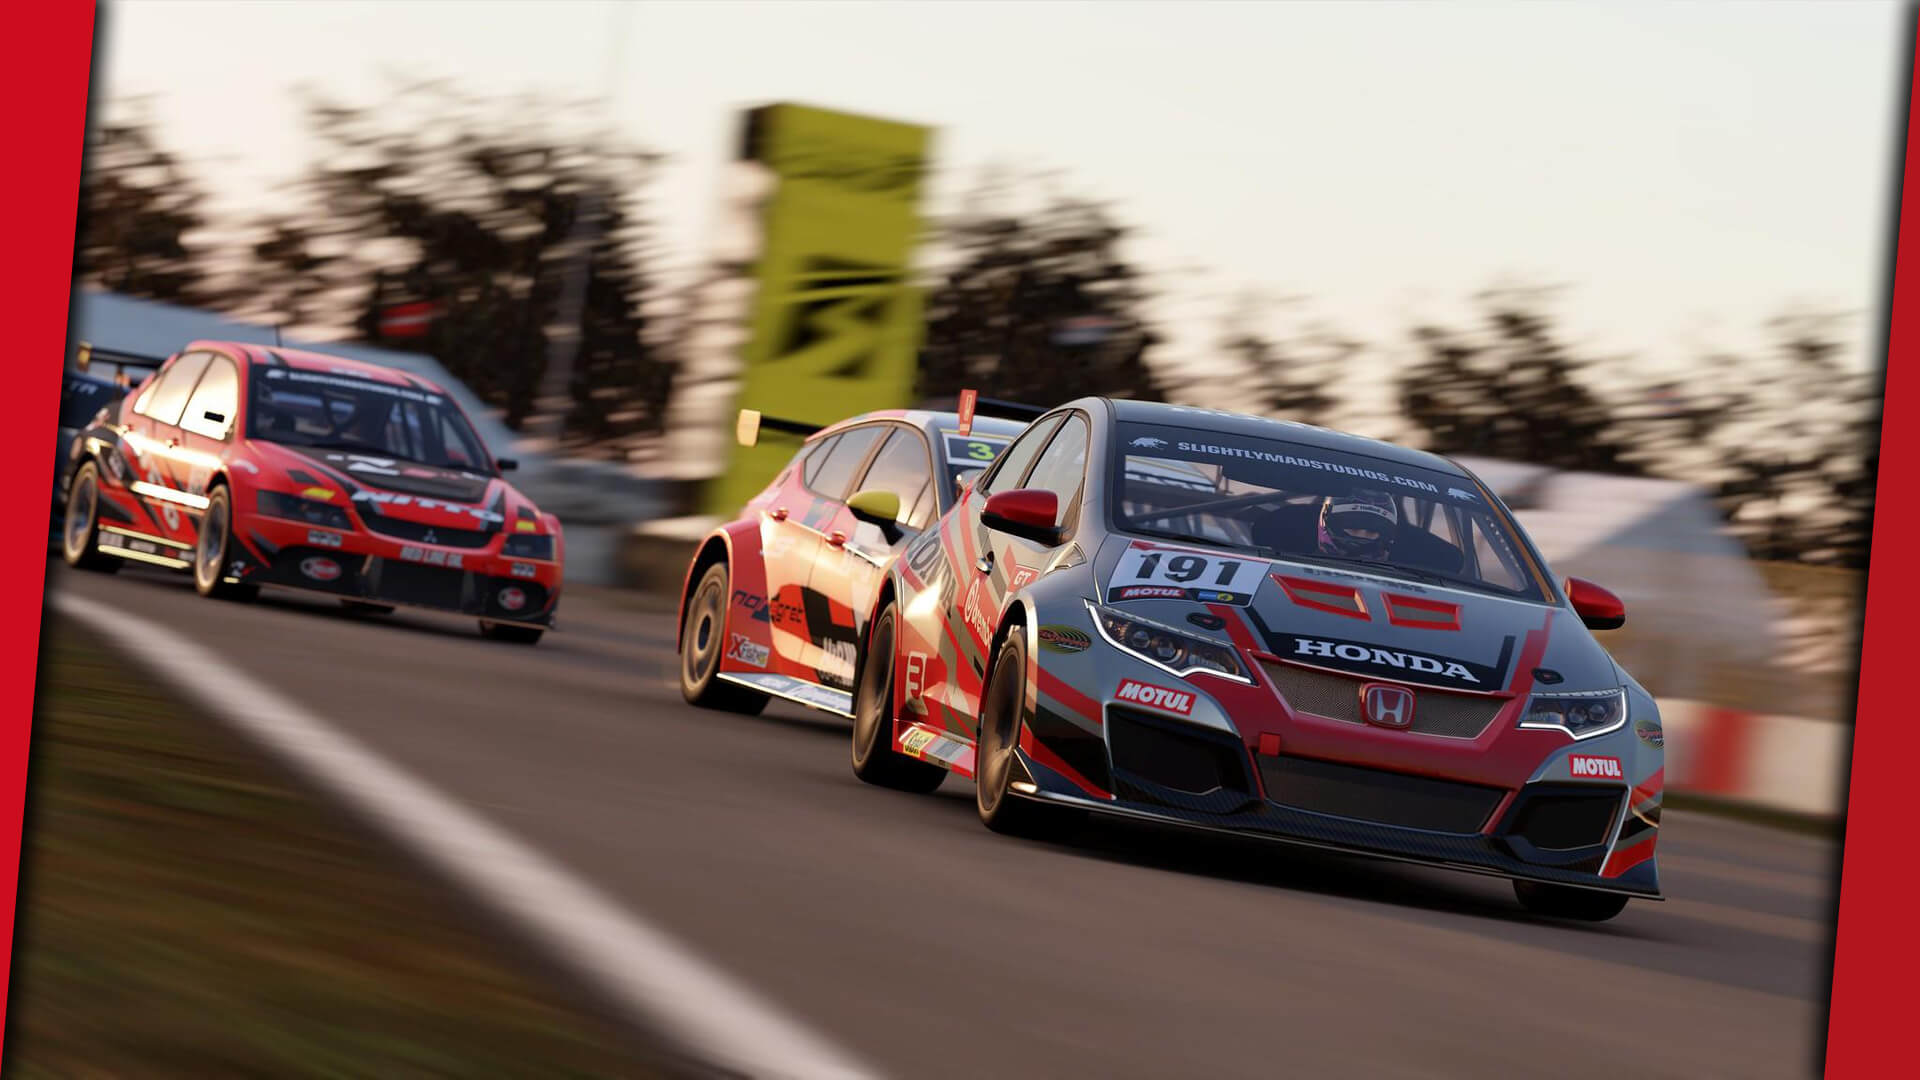 PC2 - Project CARS 2 Japanese Car Pack DLC Released